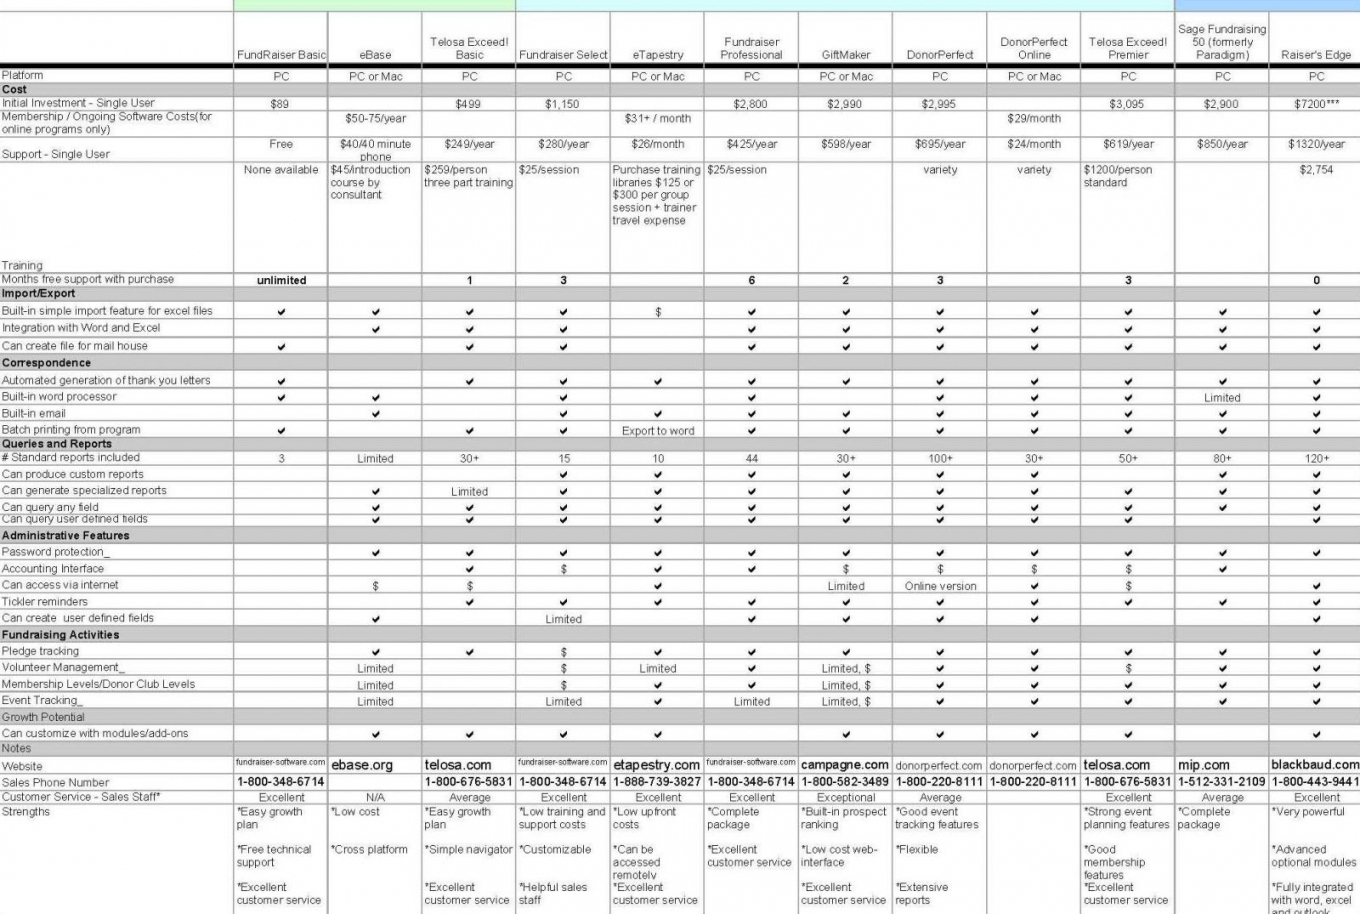 Grant Tracking Spreadsheet Template db excel com